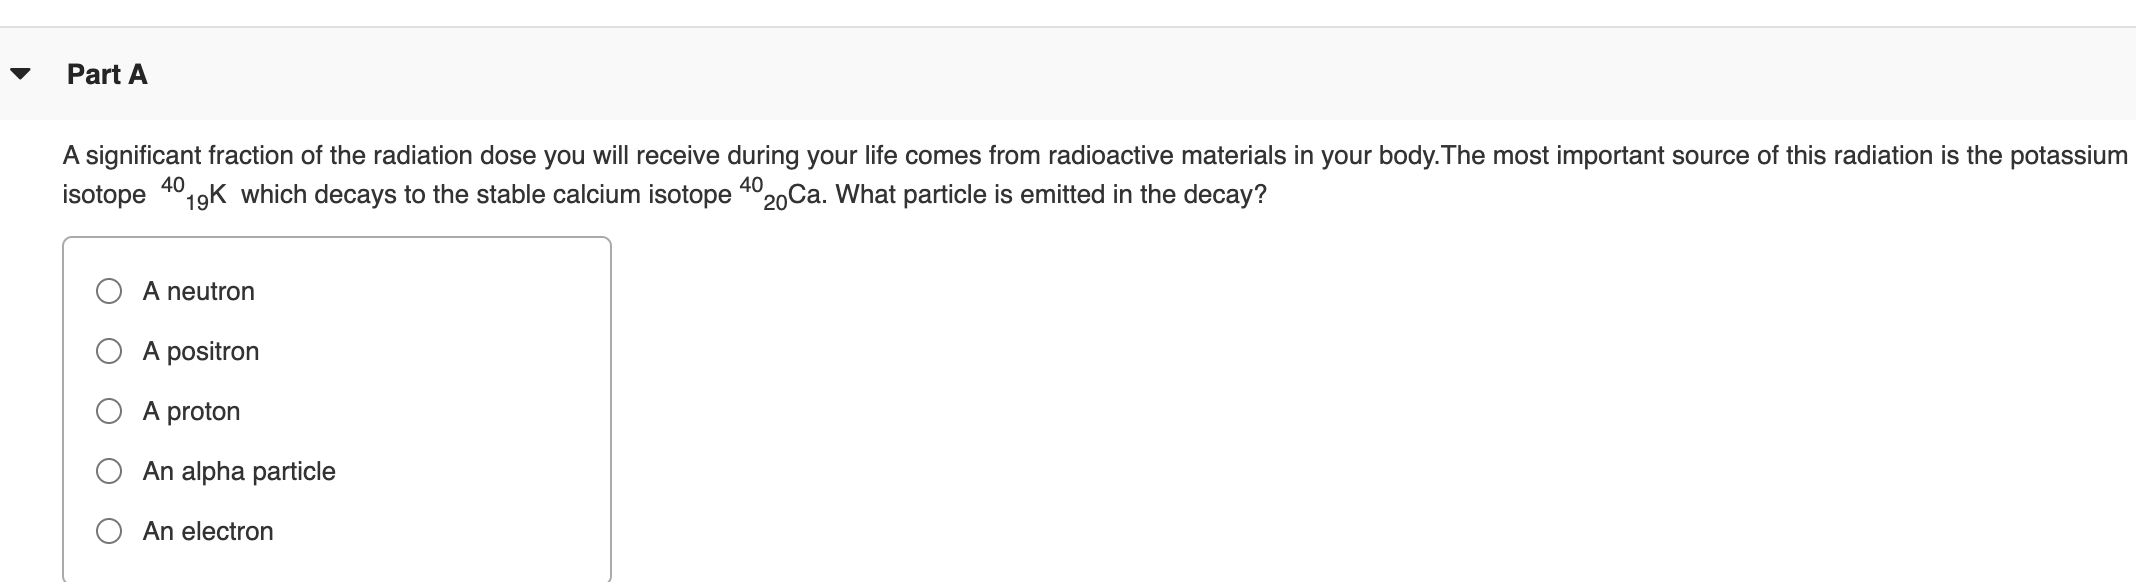 A significant fraction of the radiation dose you will receive during your life comes from radioactive materials in your body.The most important source of this radiation is the potassium
isotope 19K which decays to the stable calcium isotope 4°20Ca. What particle is emitted in the decay?
40
A neutron
A positron
A proton
An alpha particle
An electron
